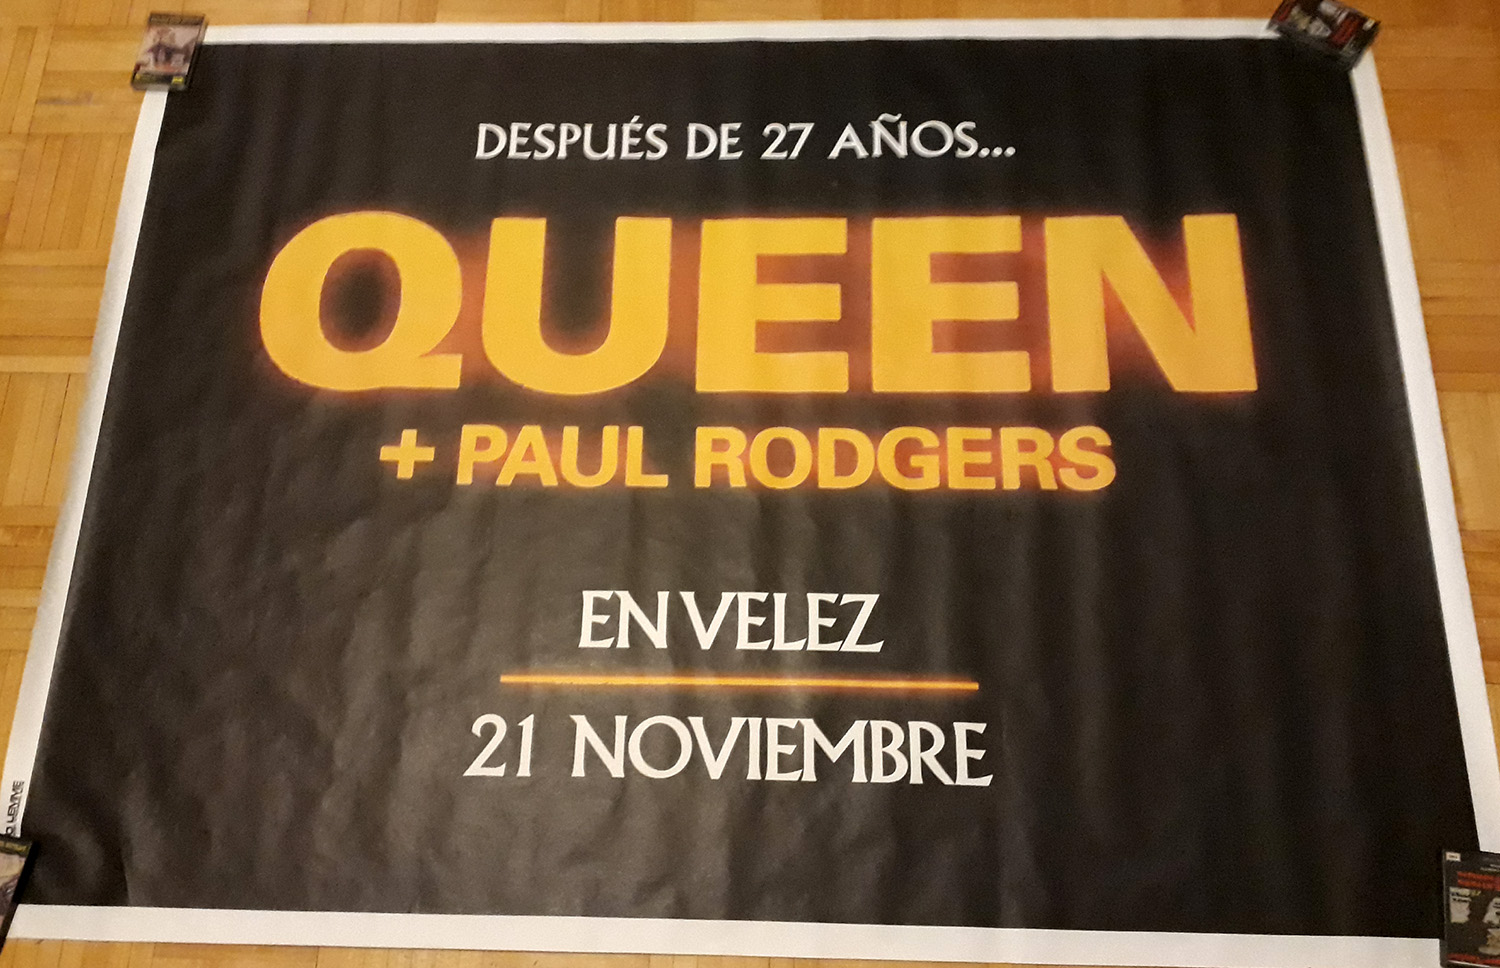 Queen + Paul Rodgers in Buenos Aires on 21.11.2008